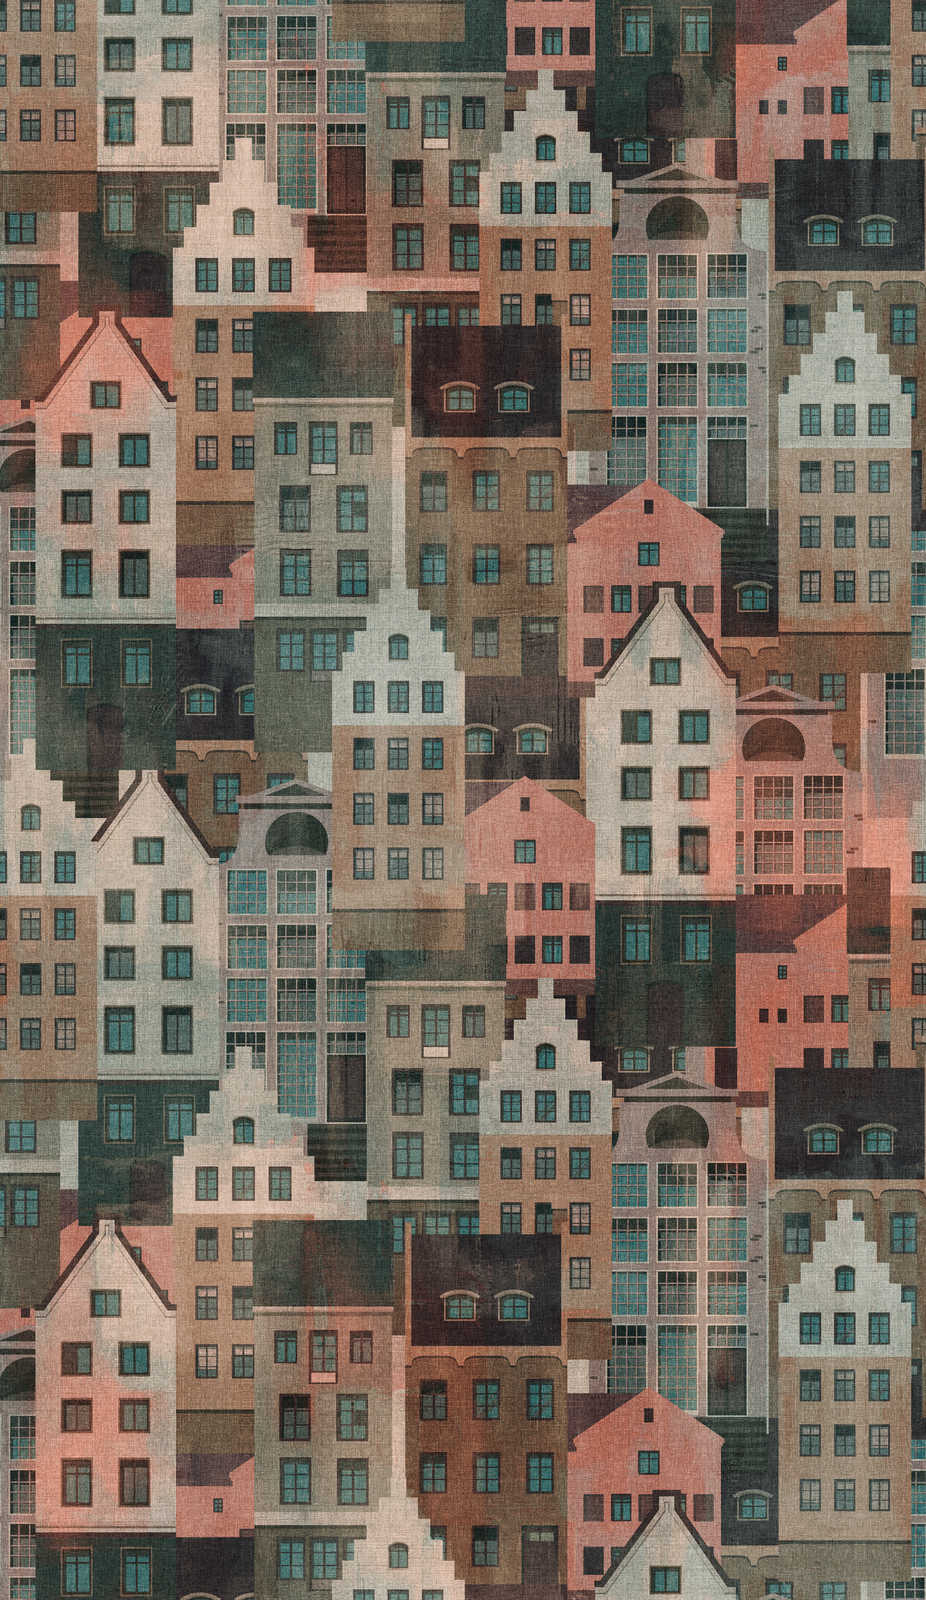             Wallpaper with striking houses pattern - colourful, blue, pink
        